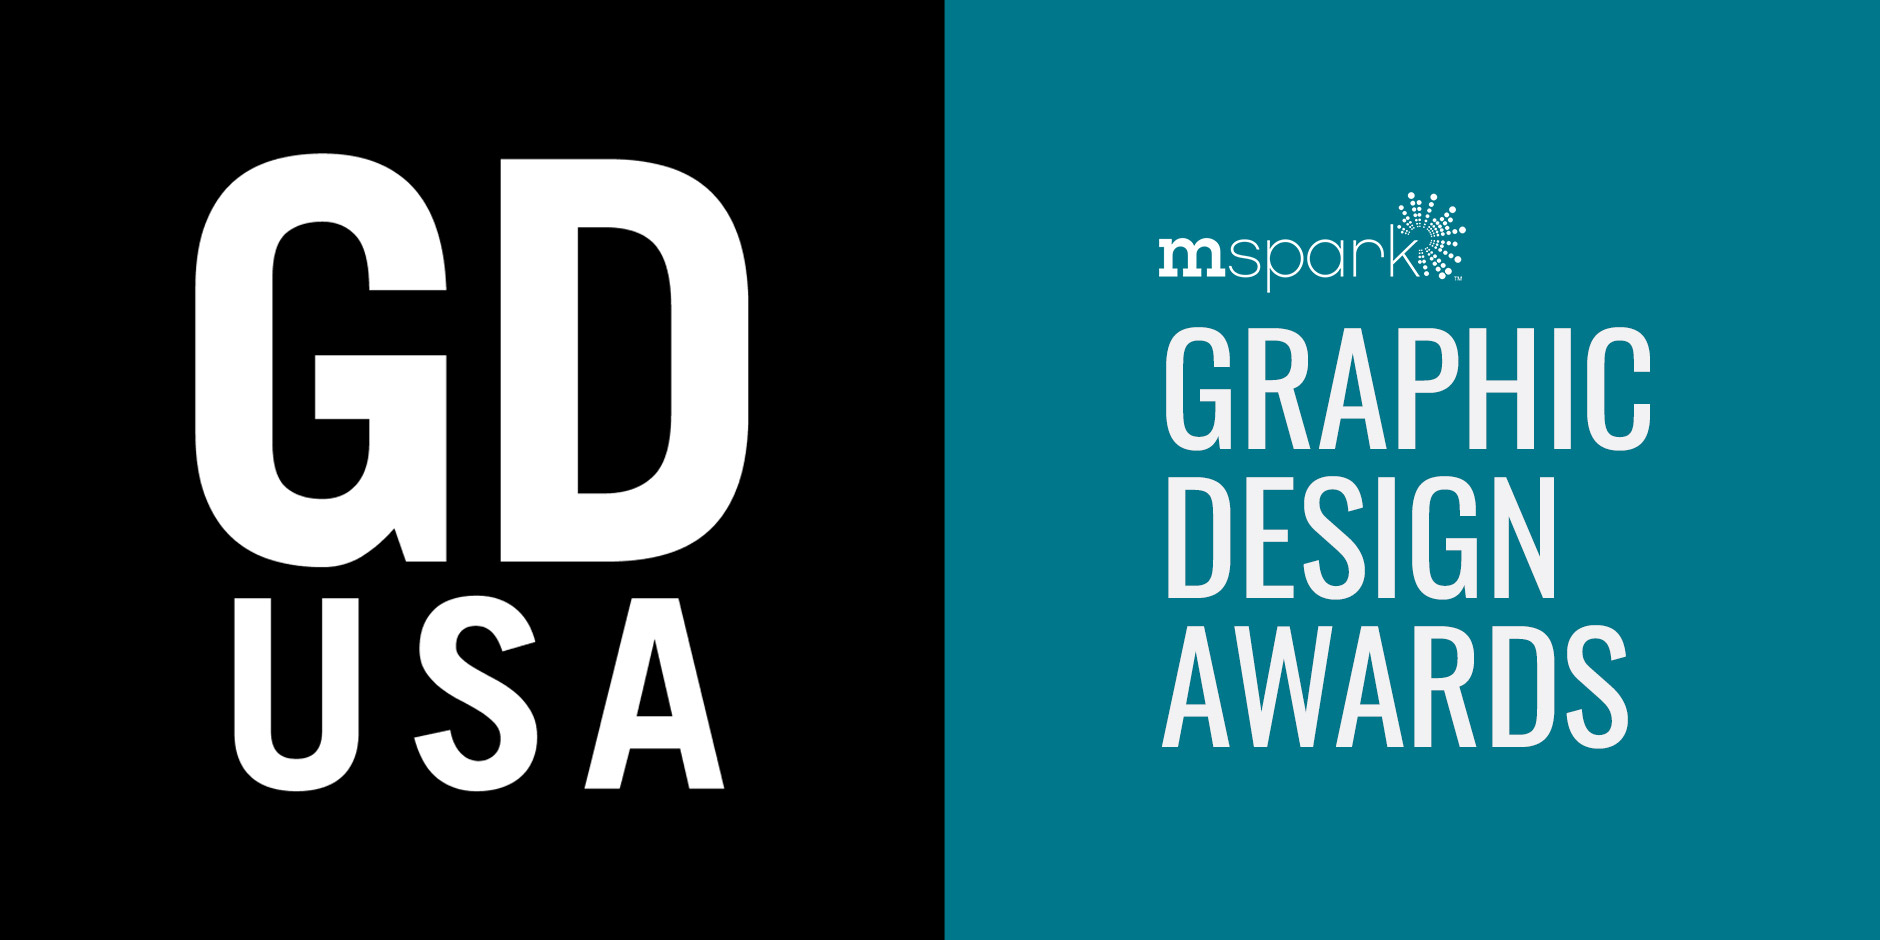 Mspark Wins 26 Awards in 2020 American Inhouse Design Awards Competition